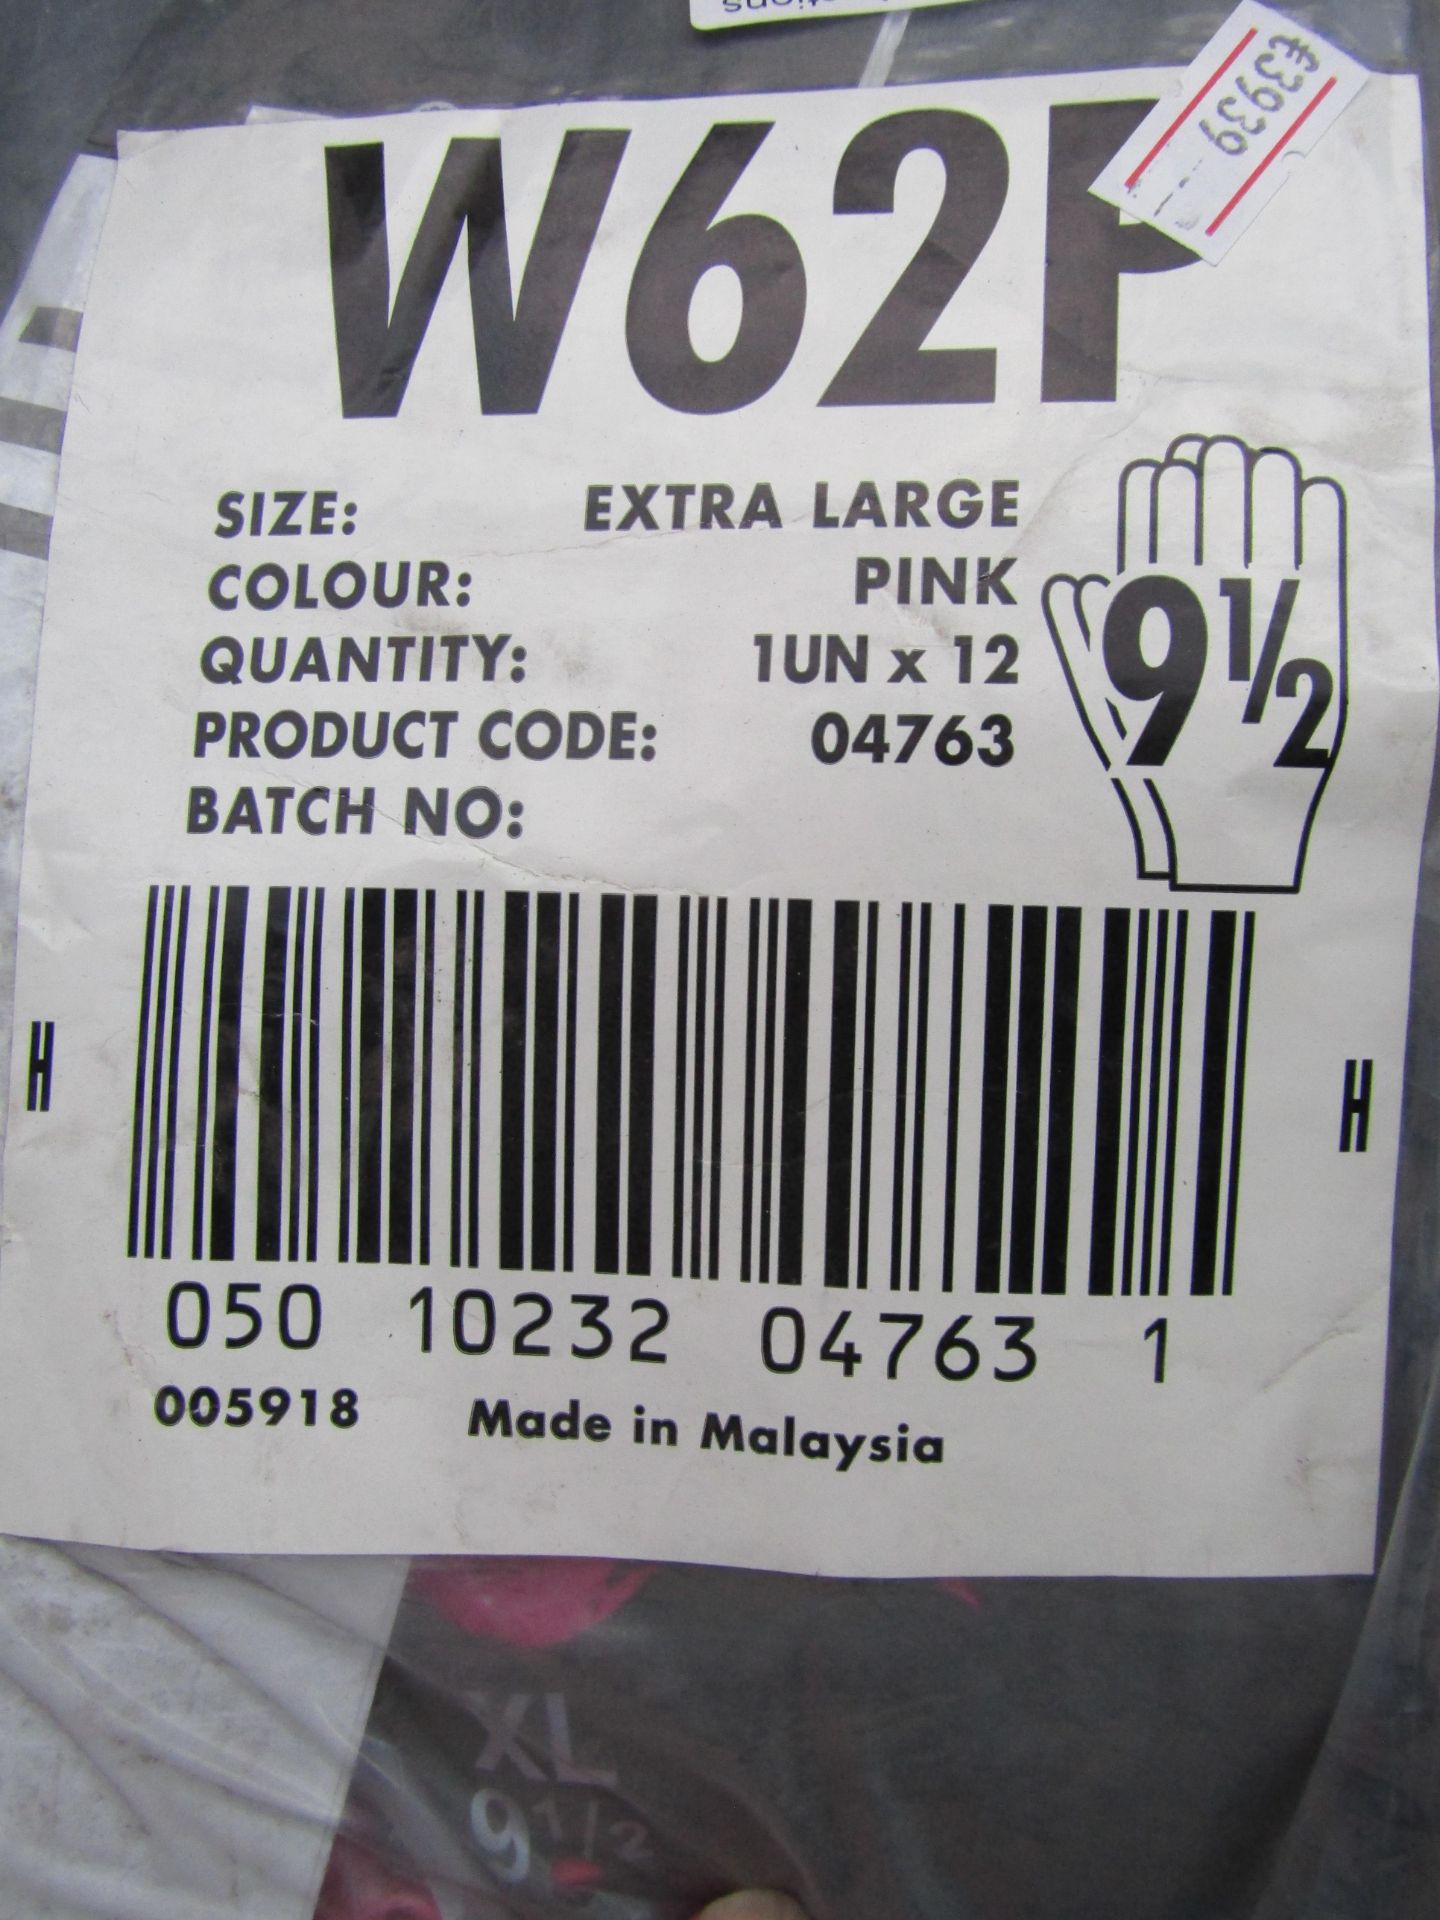 12x W26P large pink viynl gloves, size 9 1/2, new and packaged.